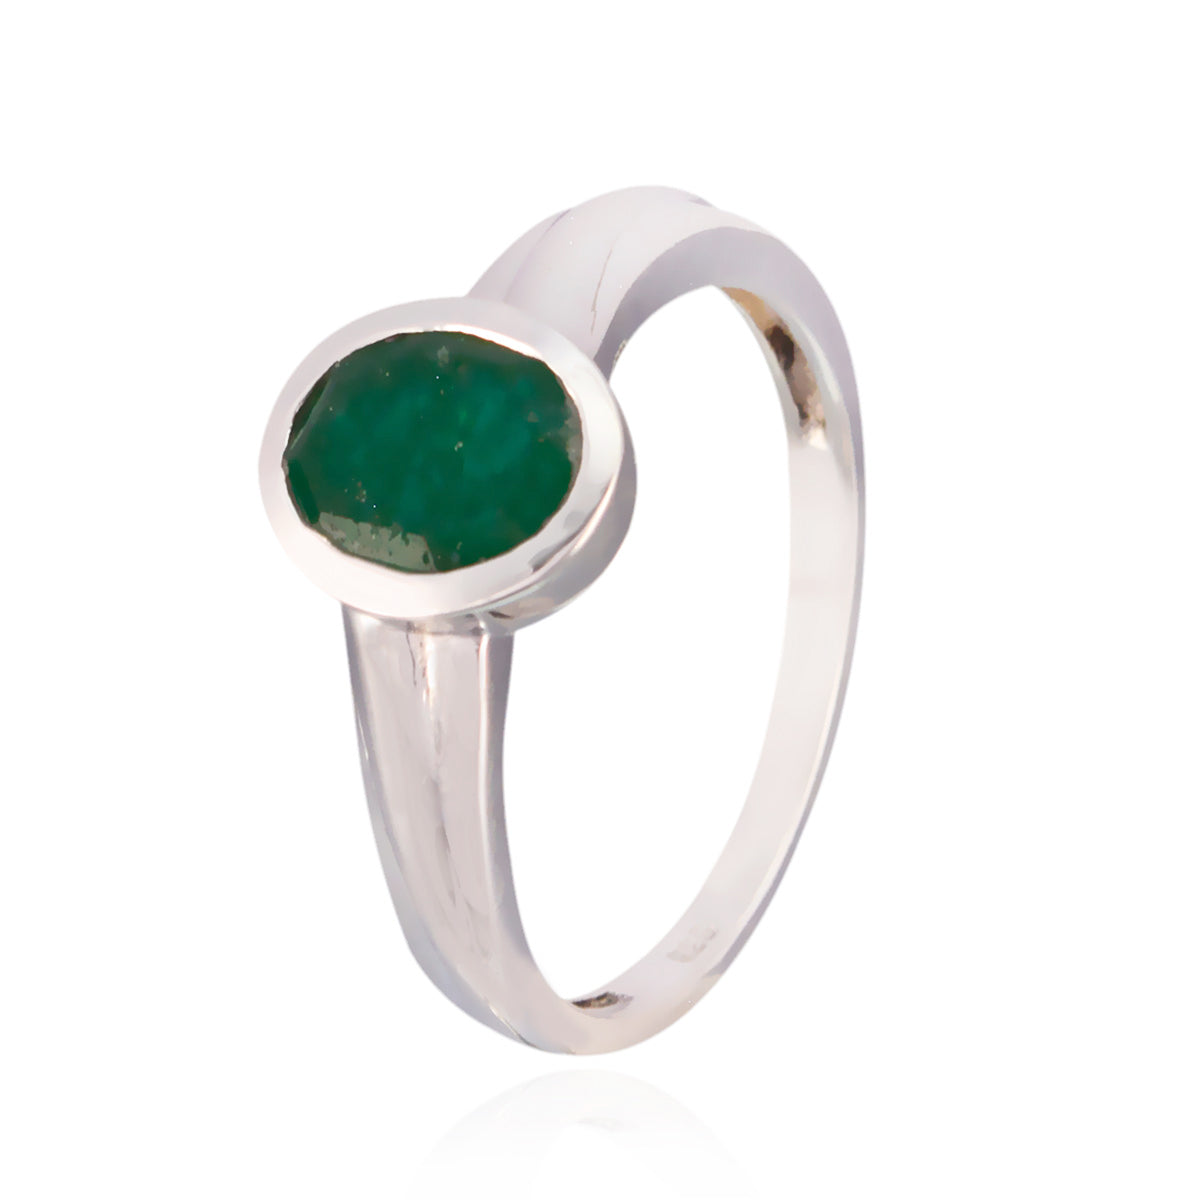 Genuine Gemstone Indianemerald Sterling Silver Ring Jewelry For Sale